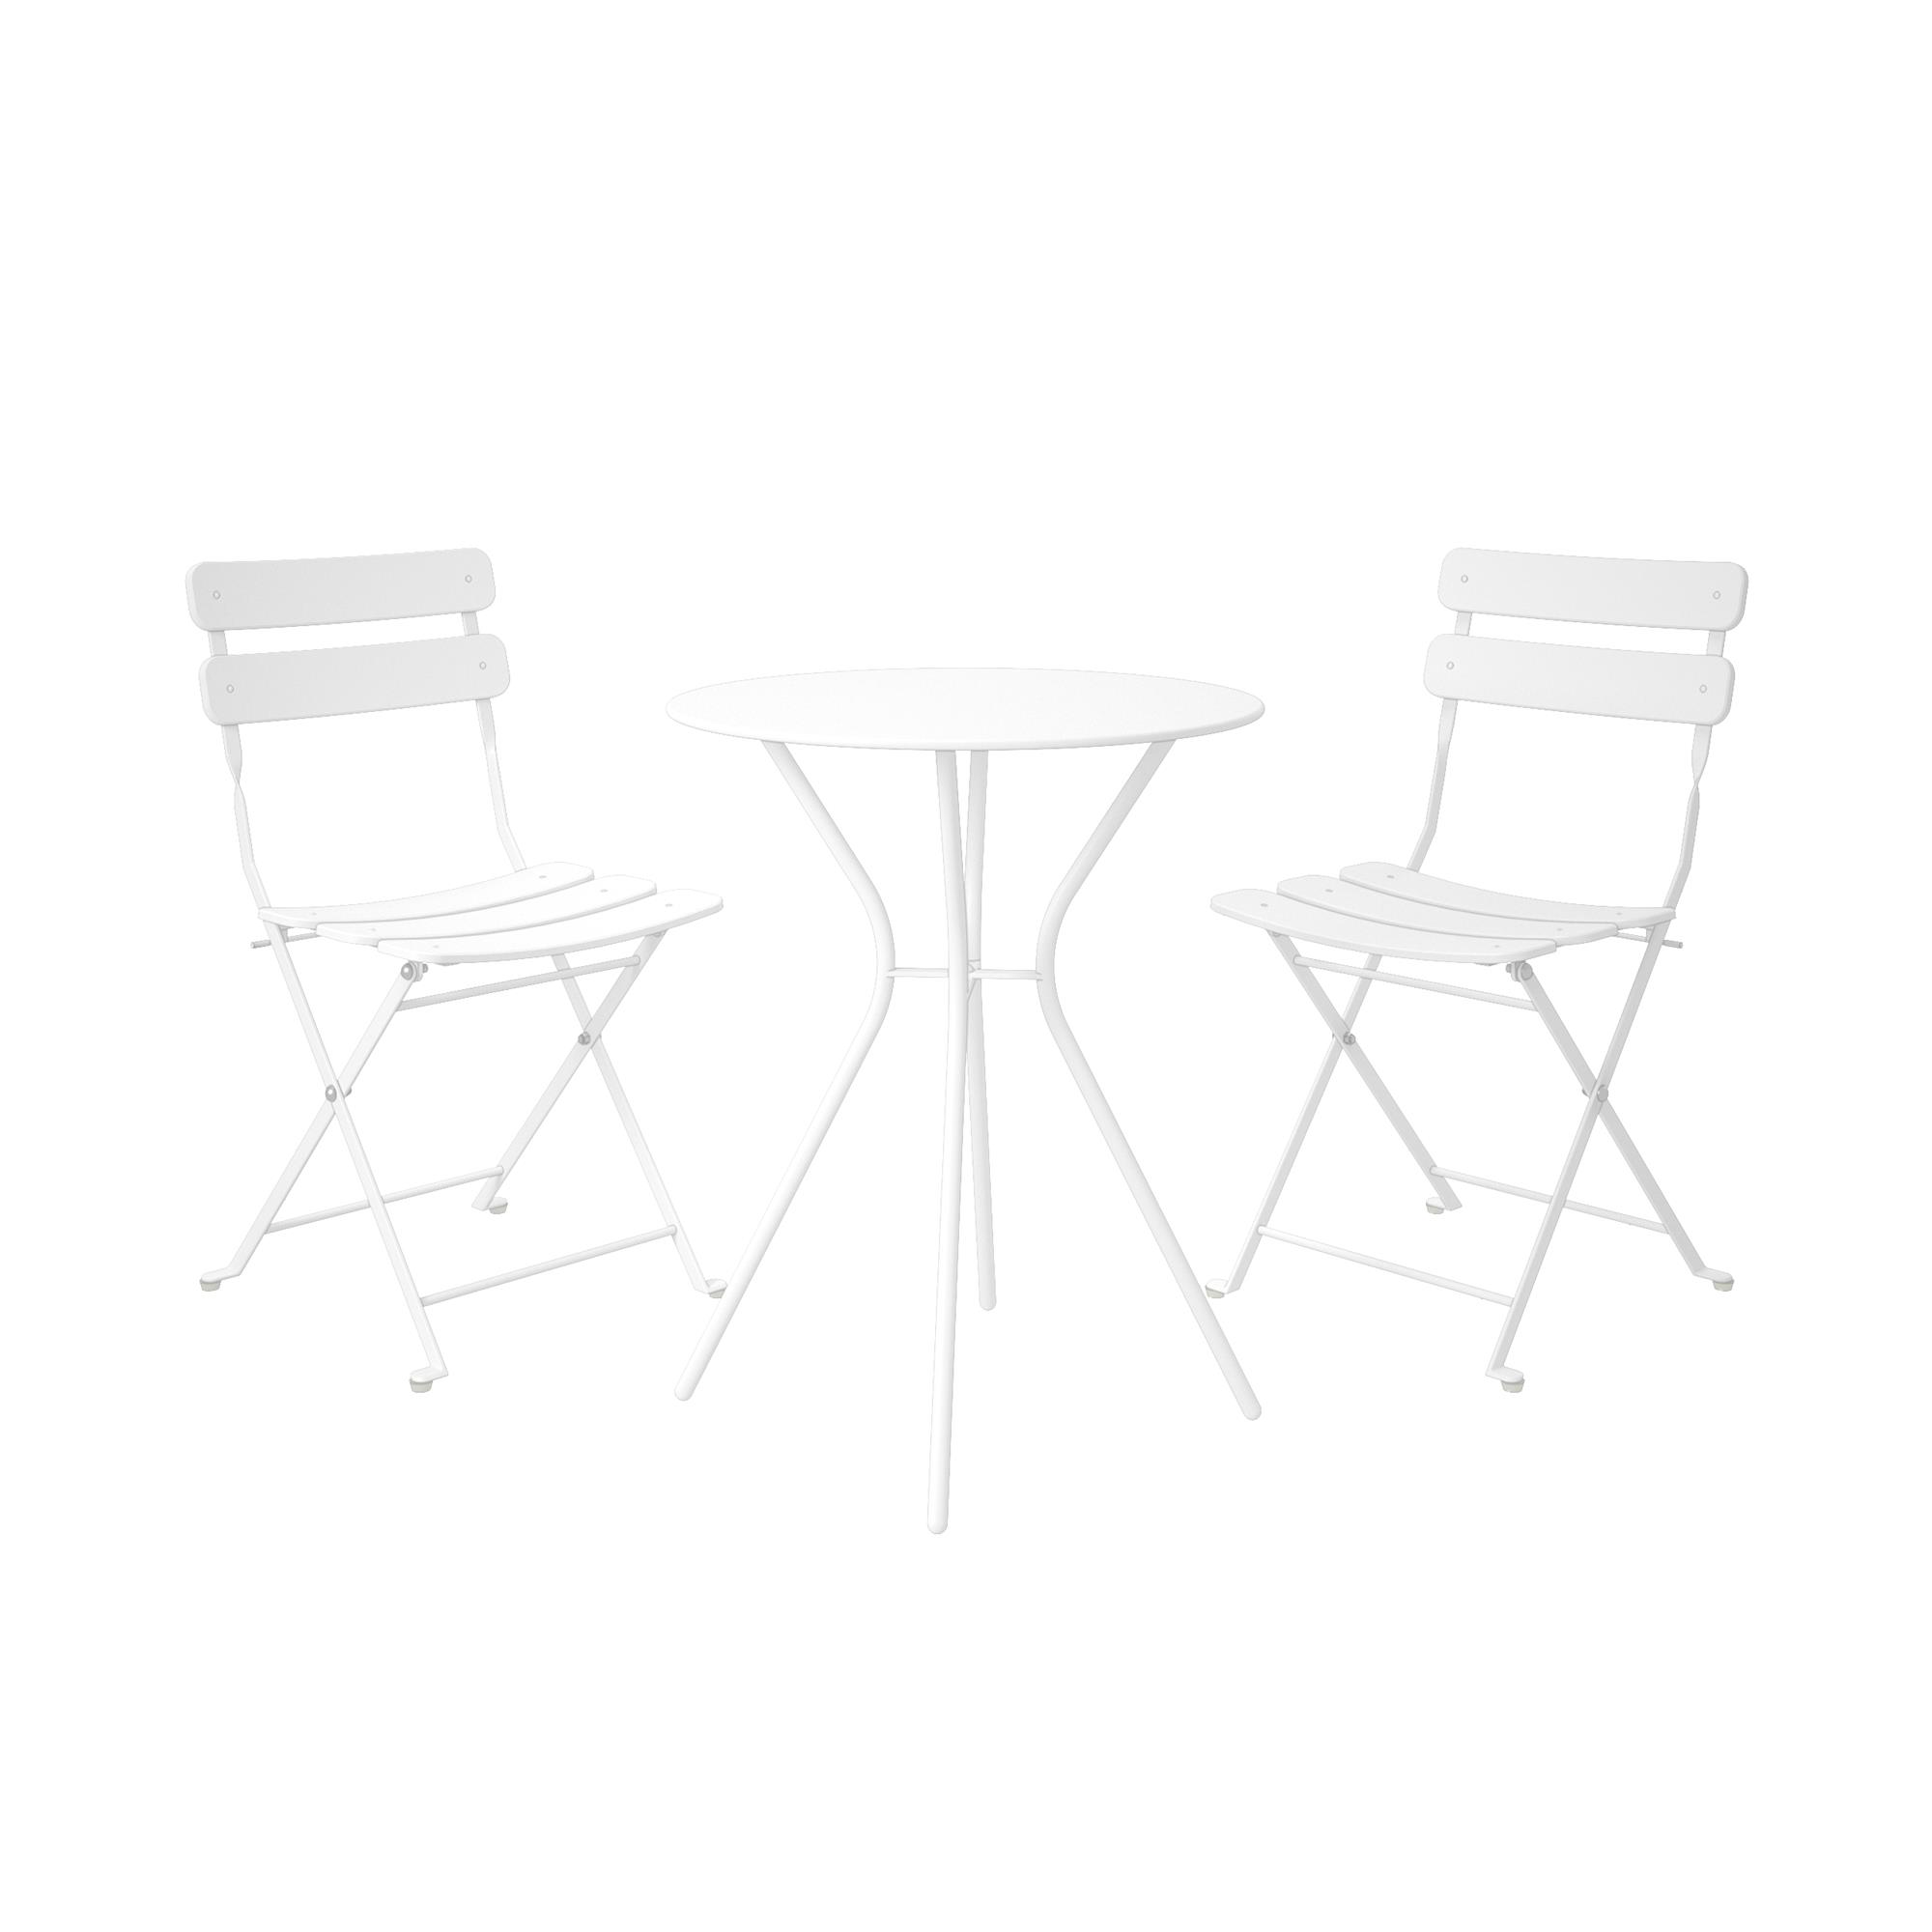 COSCO Outdoor Living, 3 Piece Bistro Set with 2 Folding Chairs, White - image 3 of 7